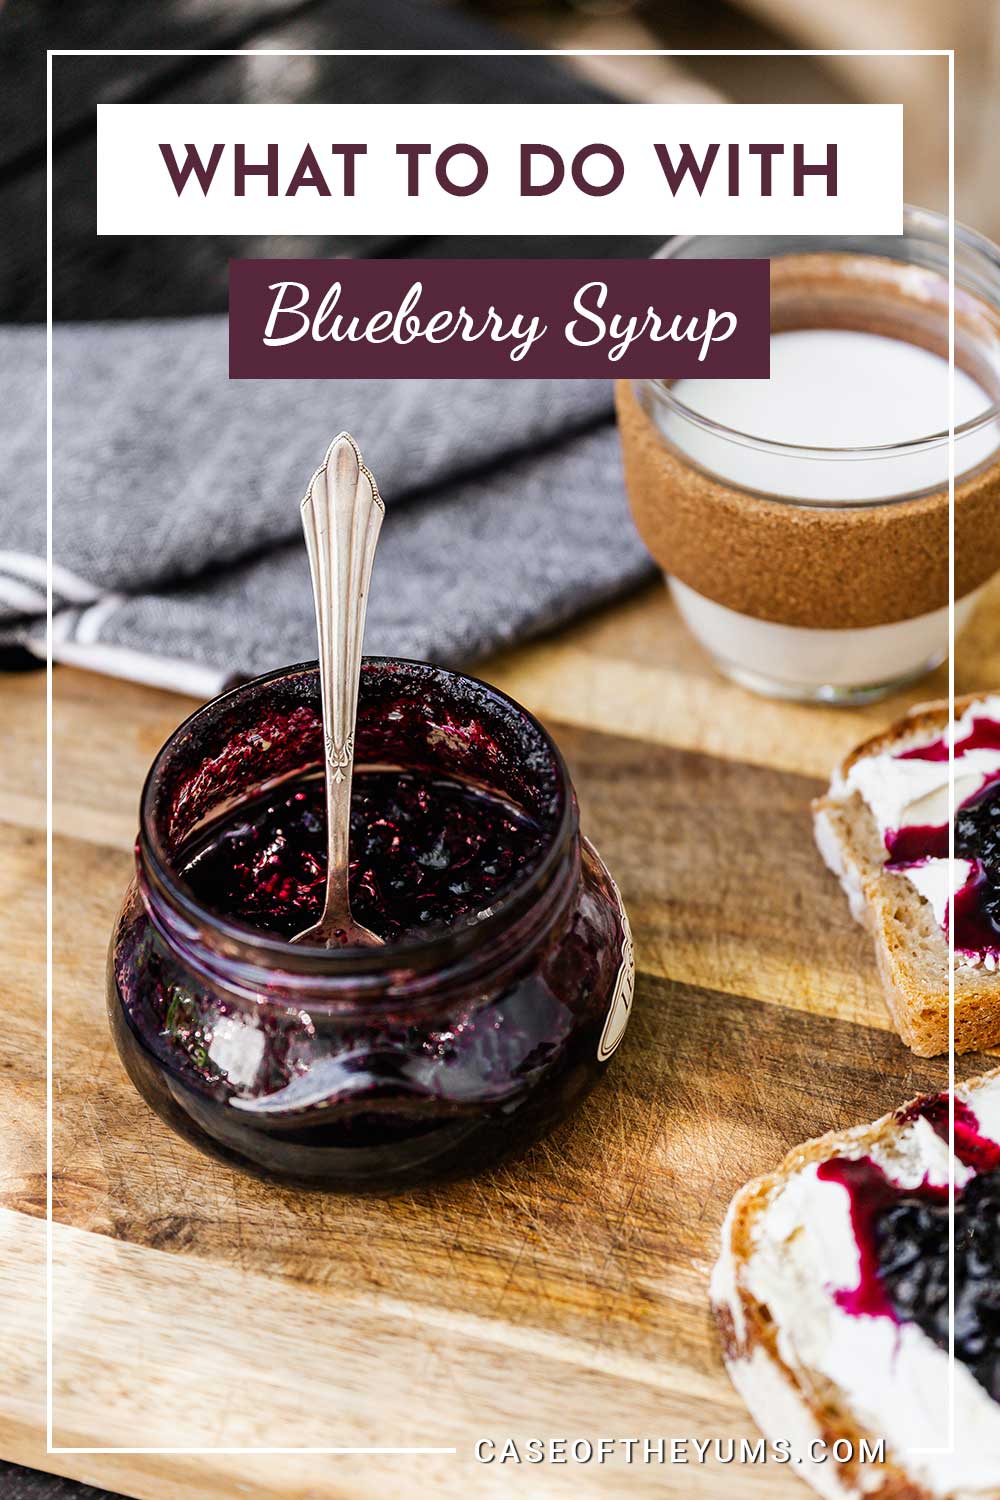 A spoon in a syrup jar on a wooden table - What To Do With Blueberry Syrup?